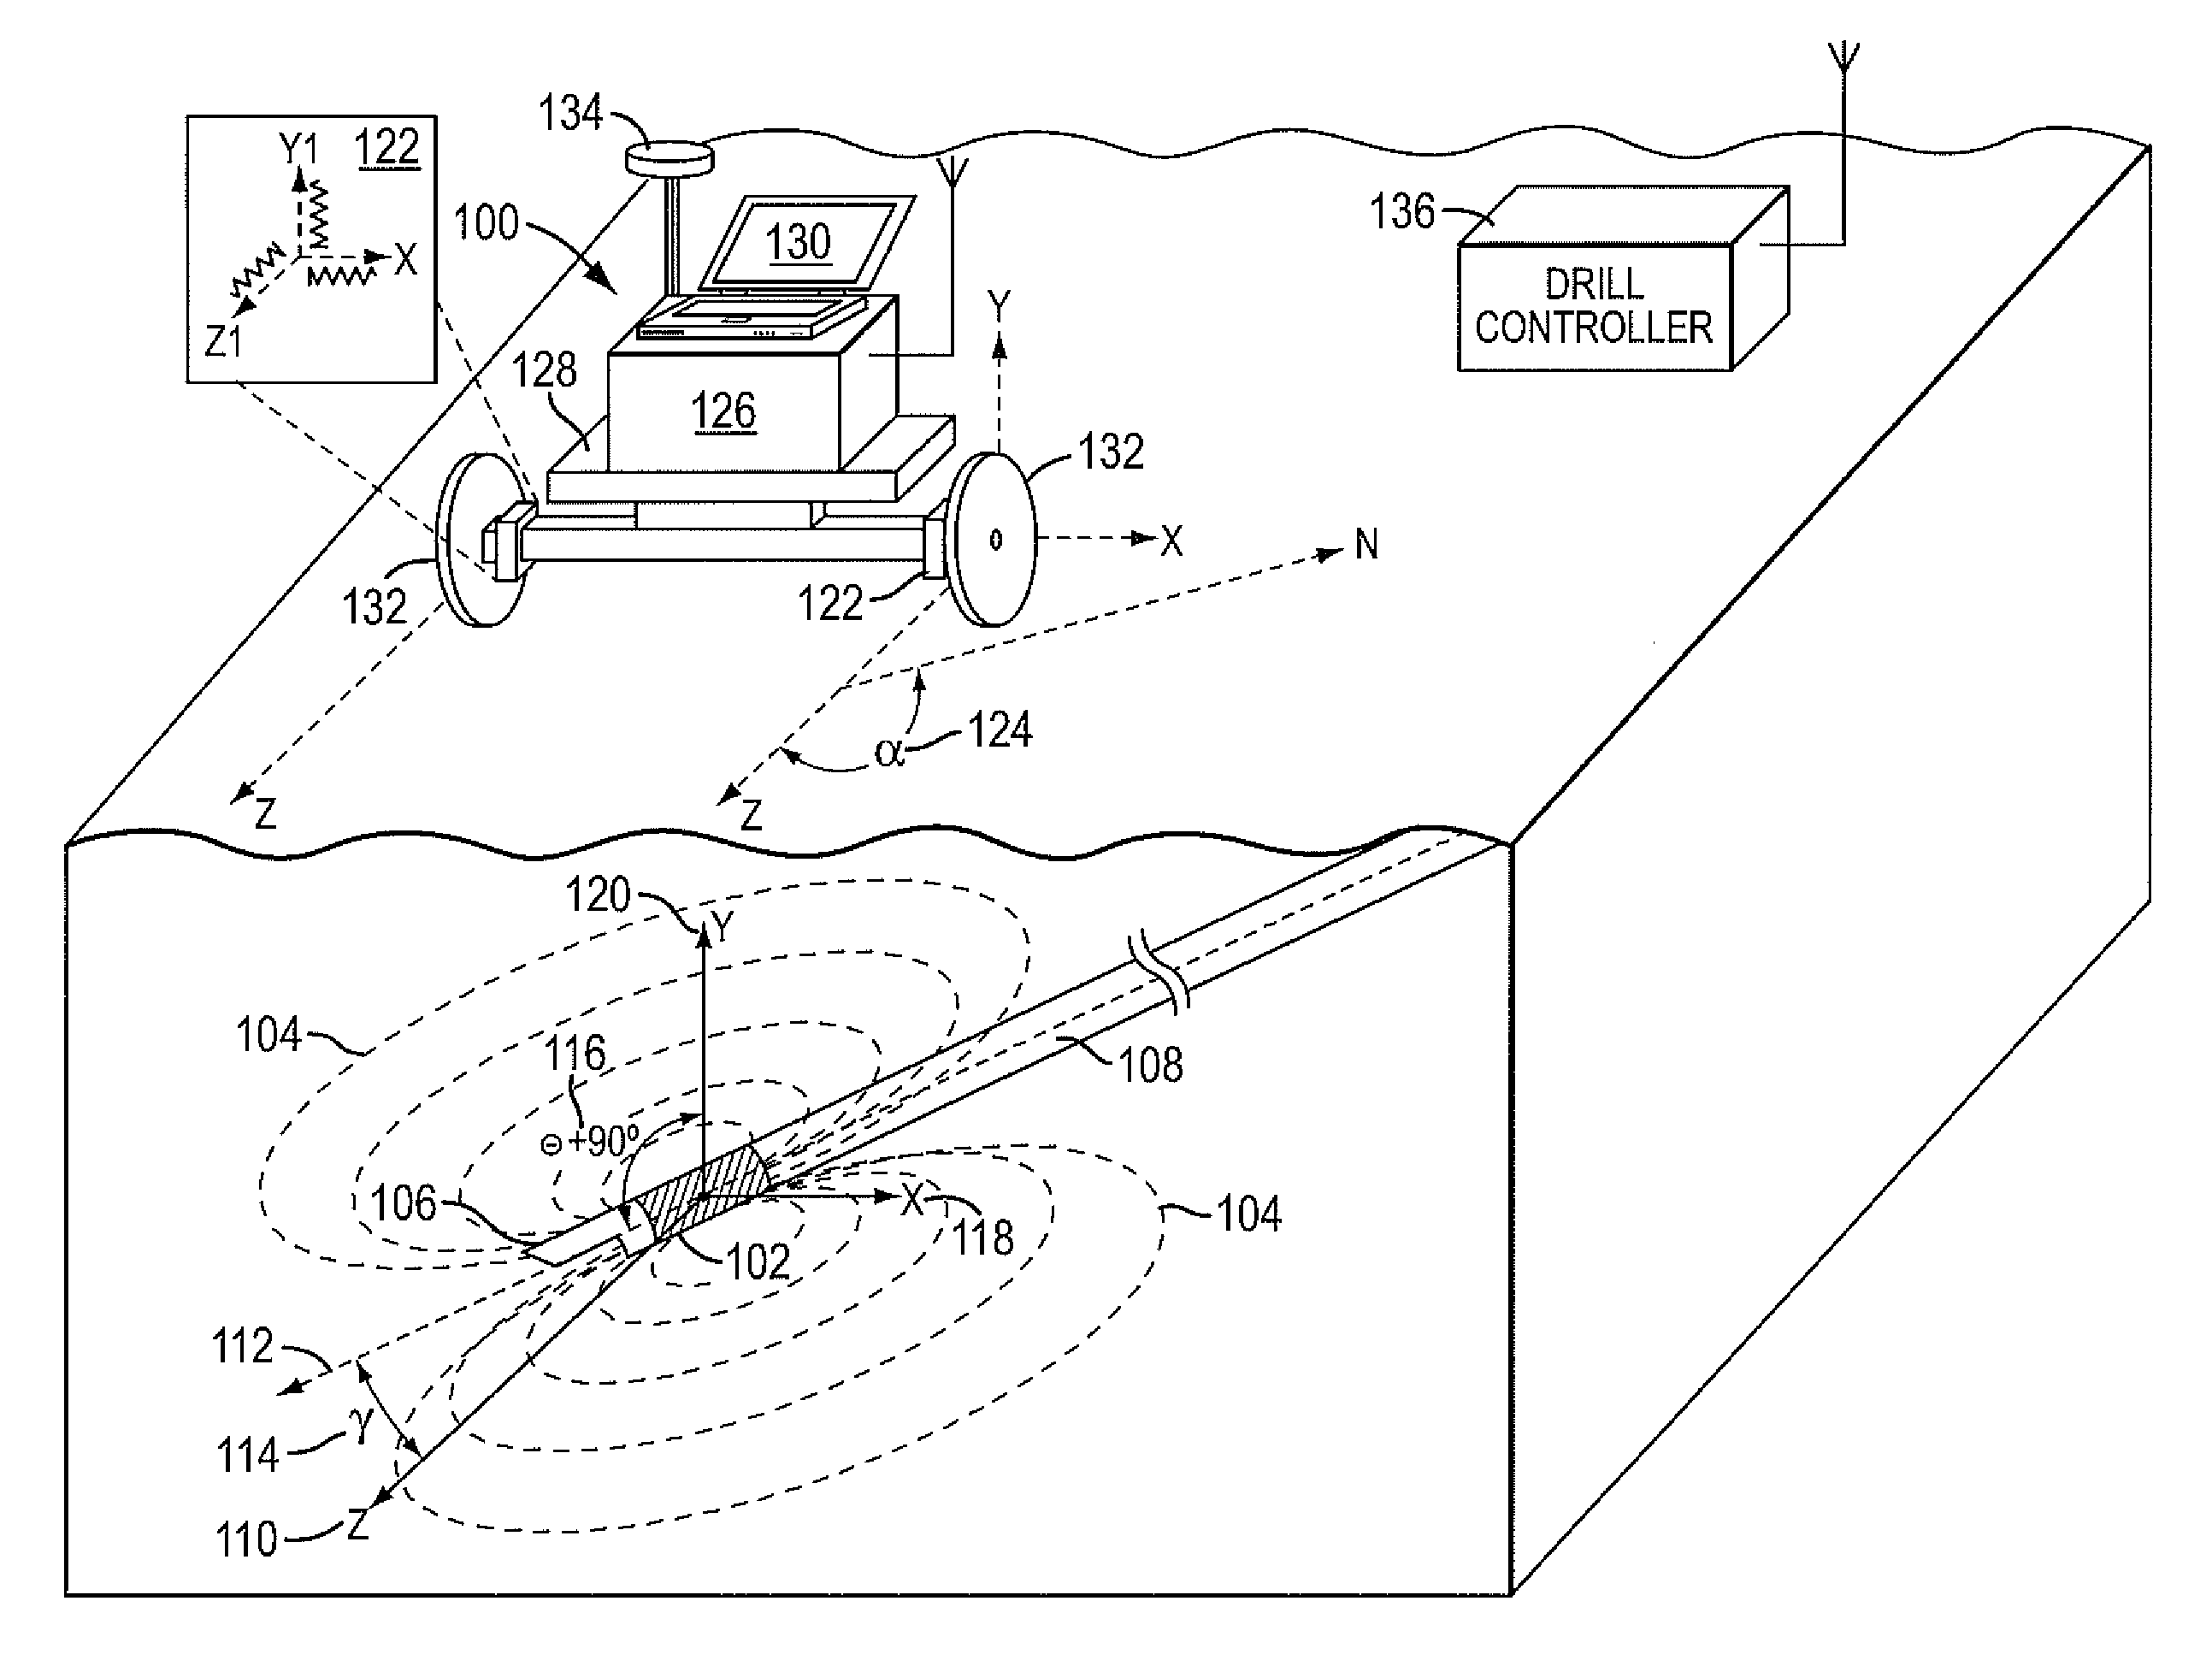 Precise location and orientation of a concealed dipole transmitter